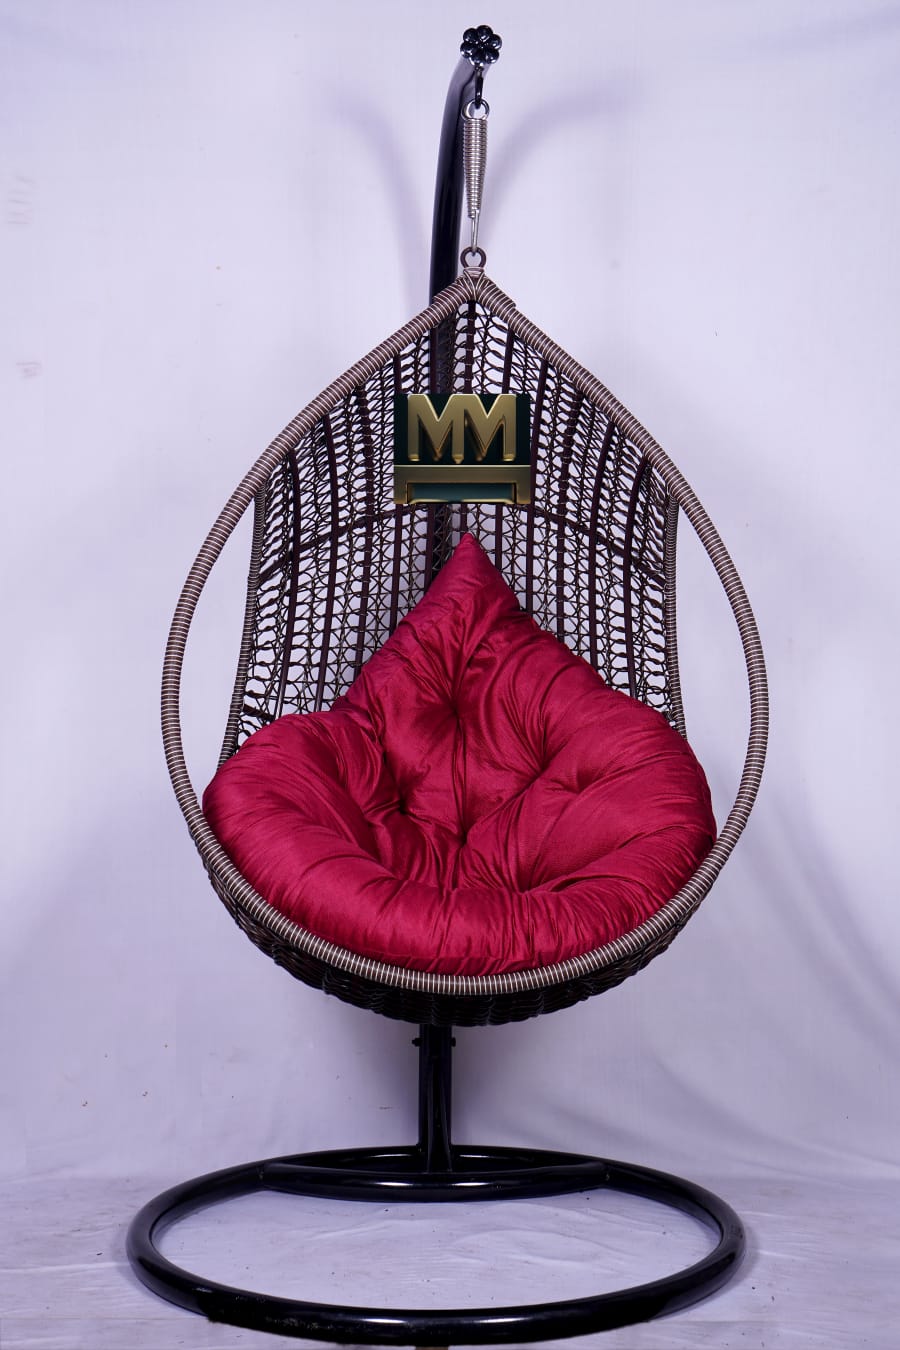 MM Furniture - Latest update - Swinging Chair Manufacturers In Bangalore